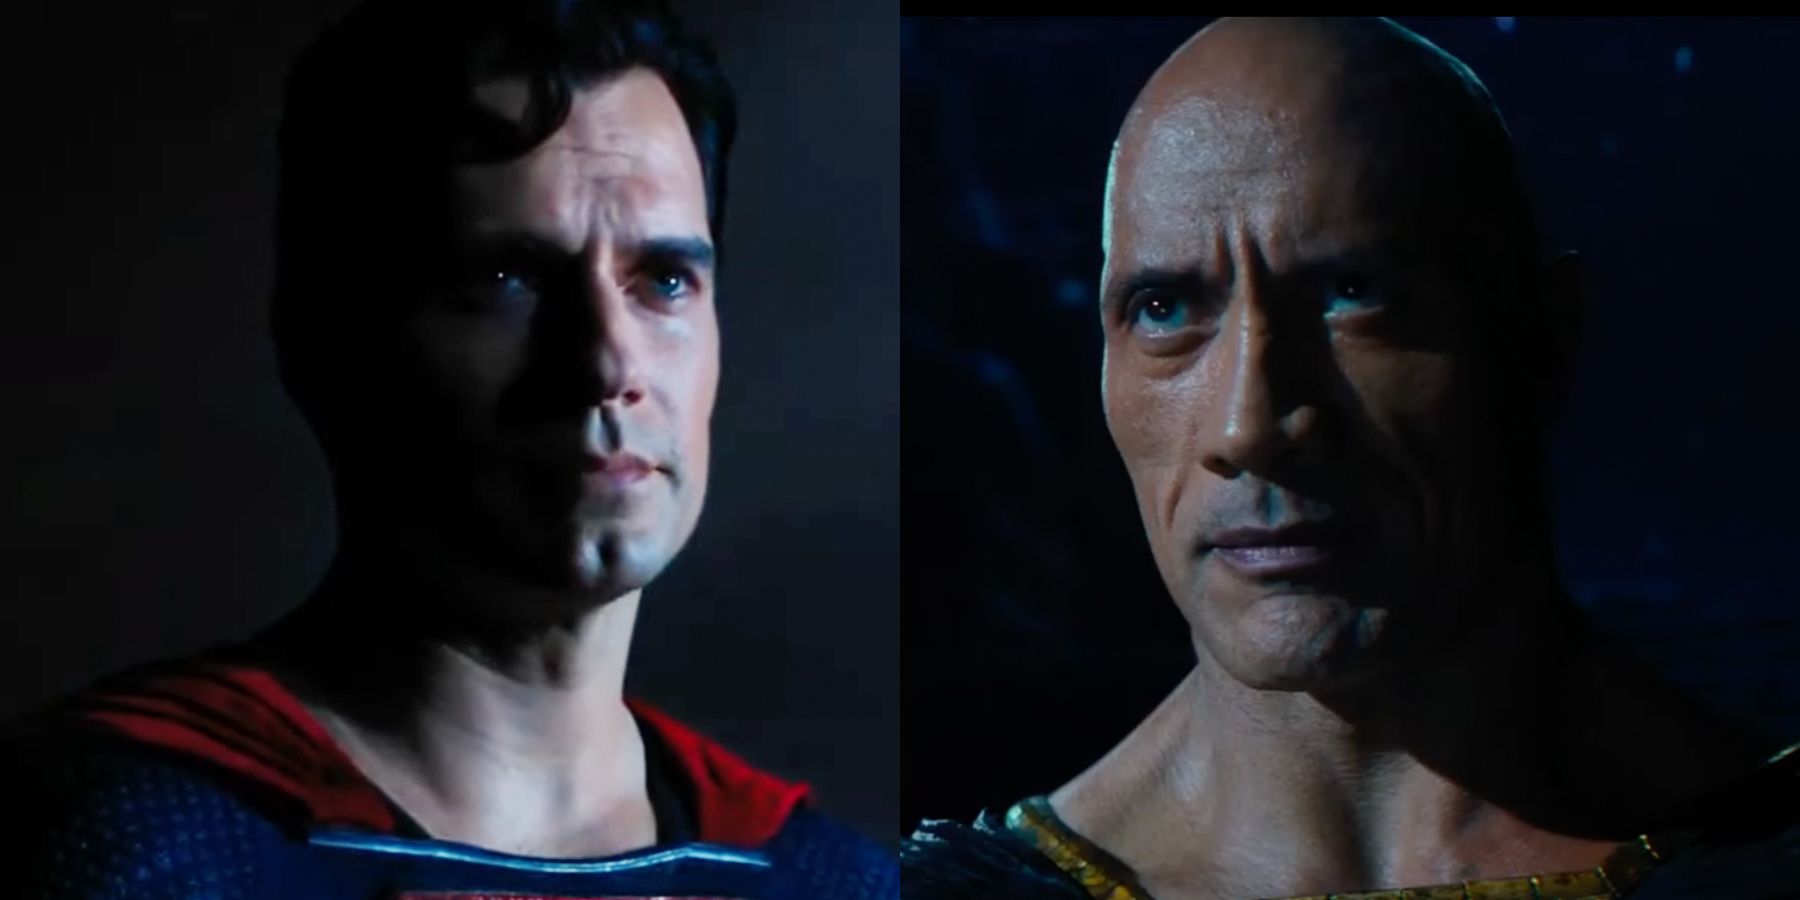 Henry Cavill Is Back as Superman in the DCU – IndieWire